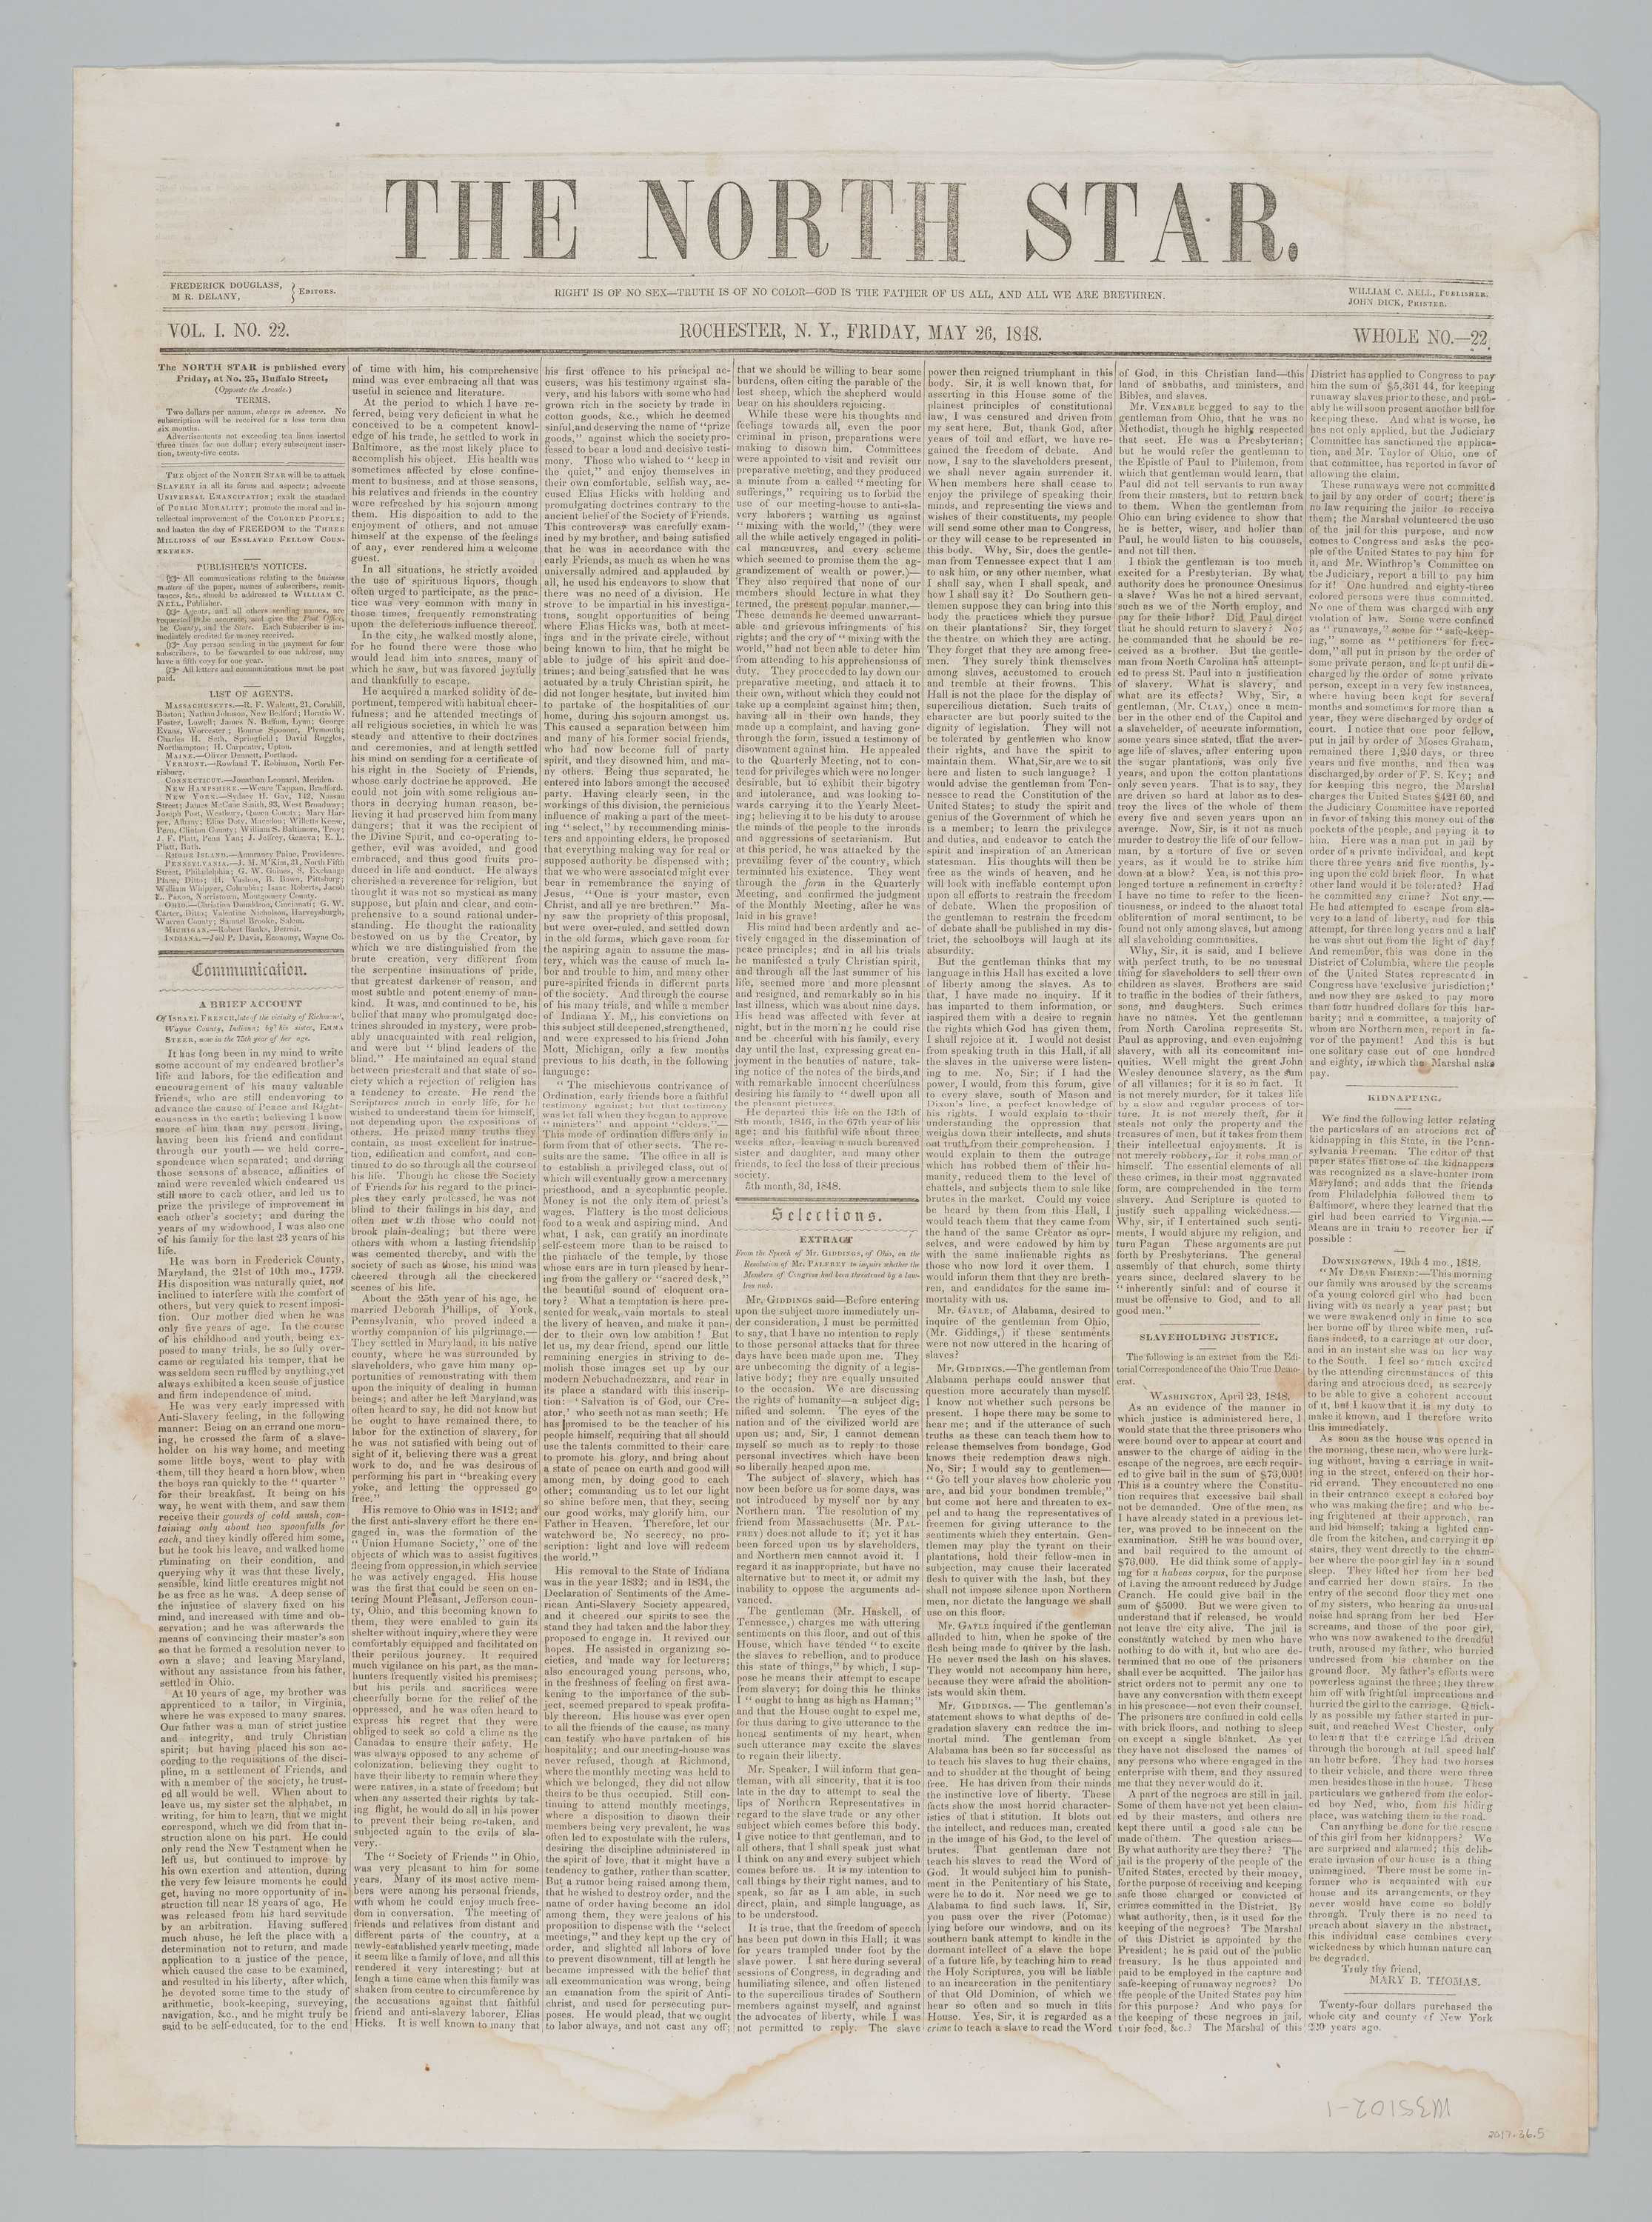 The May 26, 1848 issue of the North Star, Volume 1, Number 22.